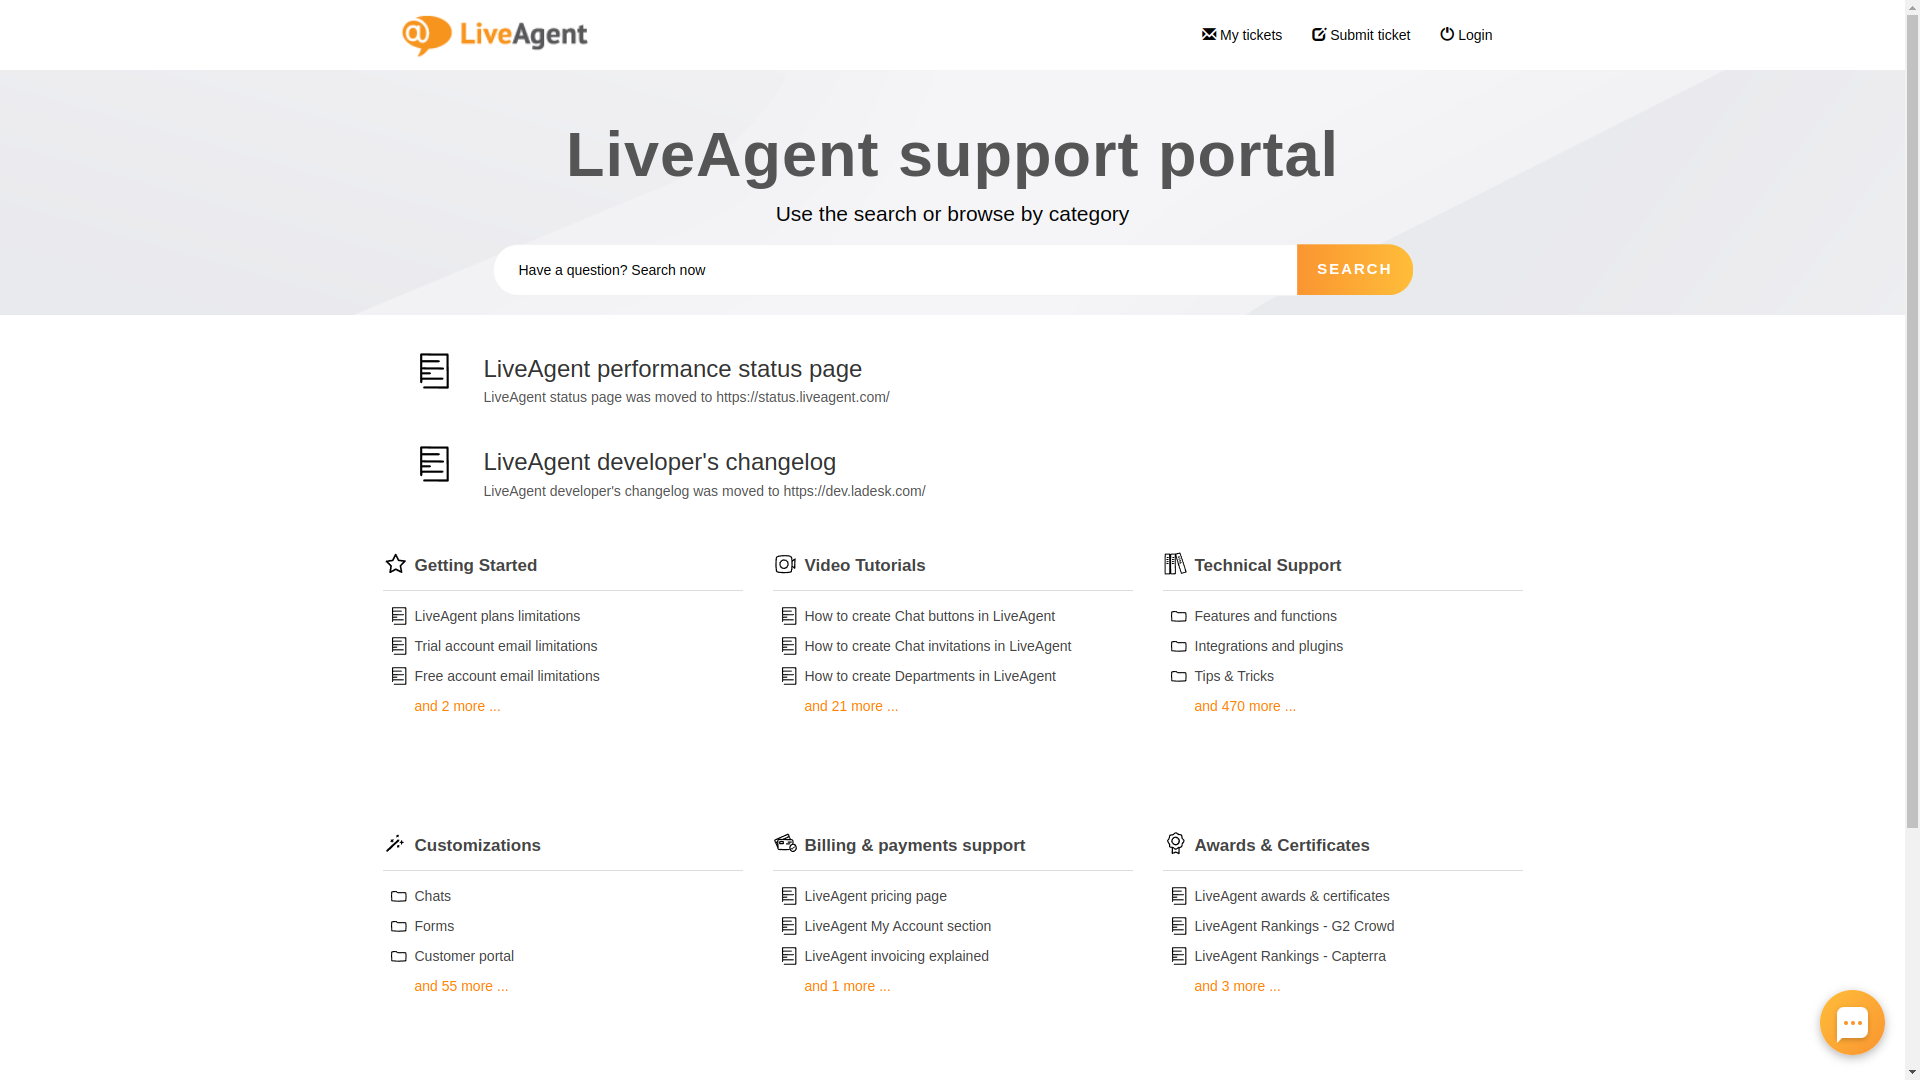 LiveAgent support page